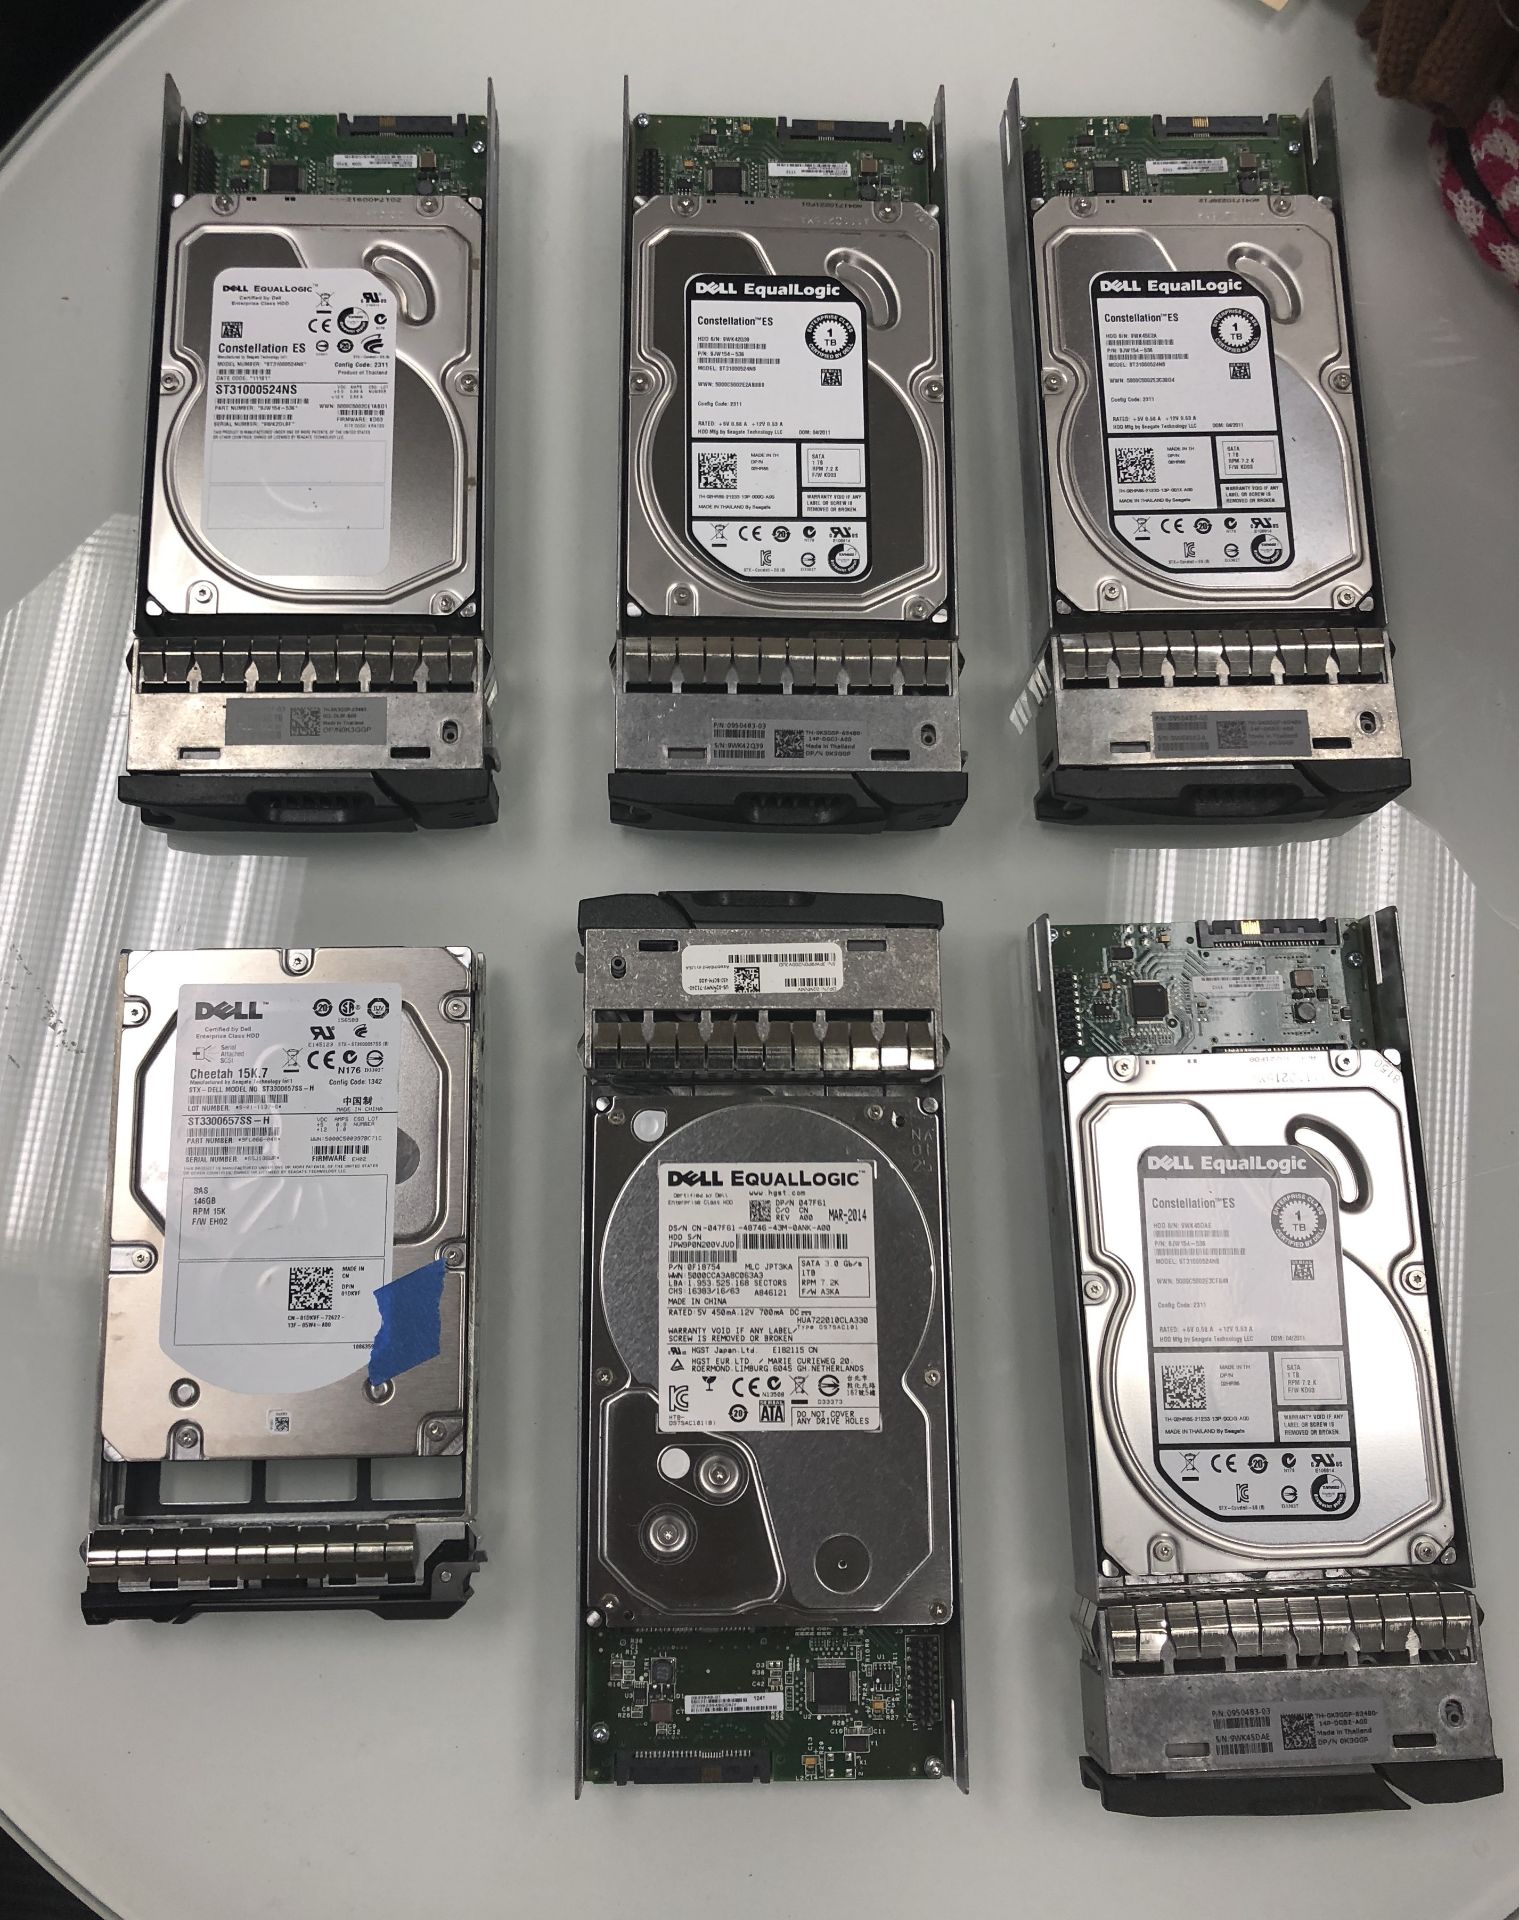 6 HARD DRIVES FROM NETWORKING SET UP